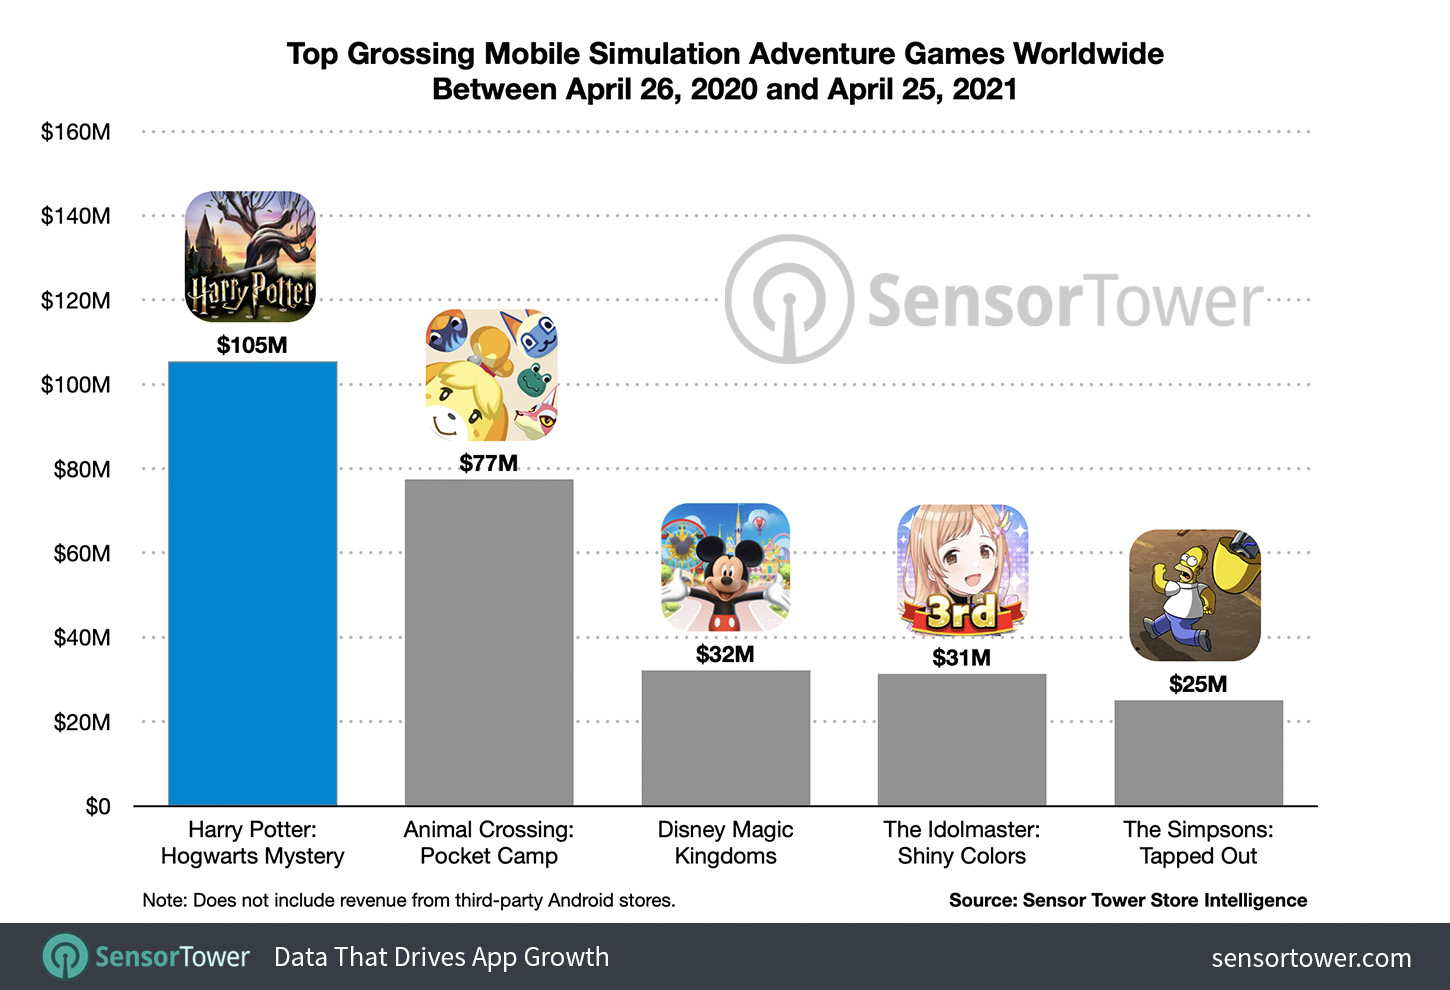 Top Grossing Mobile Simulation Adventure Games Worldwide Between April 26, 2020 and April 25, 2021